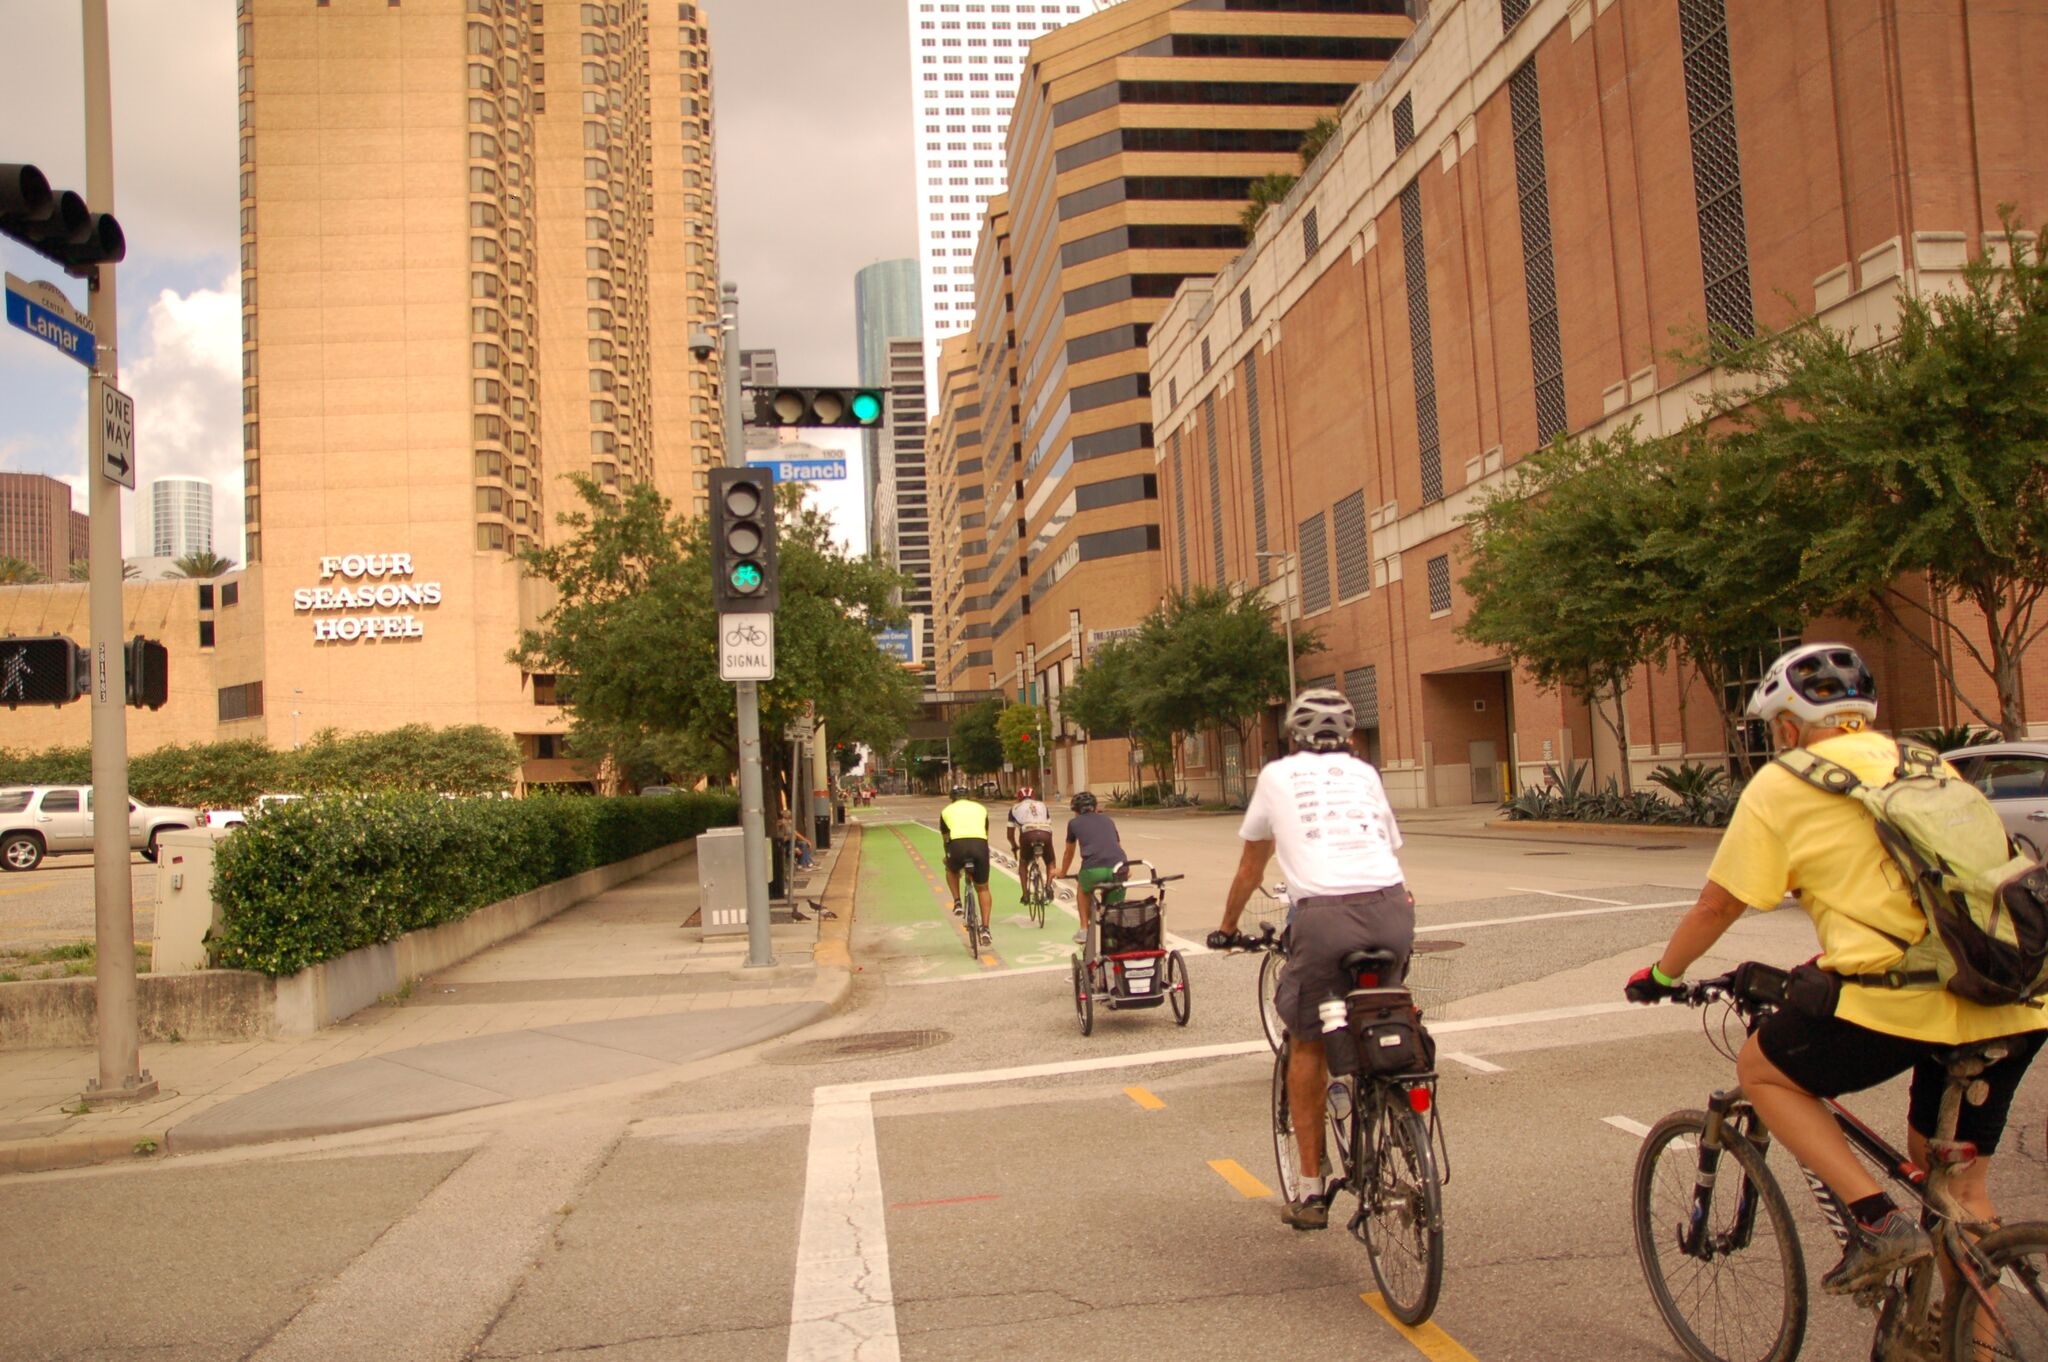 The Lamar Street bikeway connects downtown Houston to the Buffalo Bayou. The ultimate goal of the City of Houston’s bike plan is to have a network of over 1,780 miles by the year 2026.